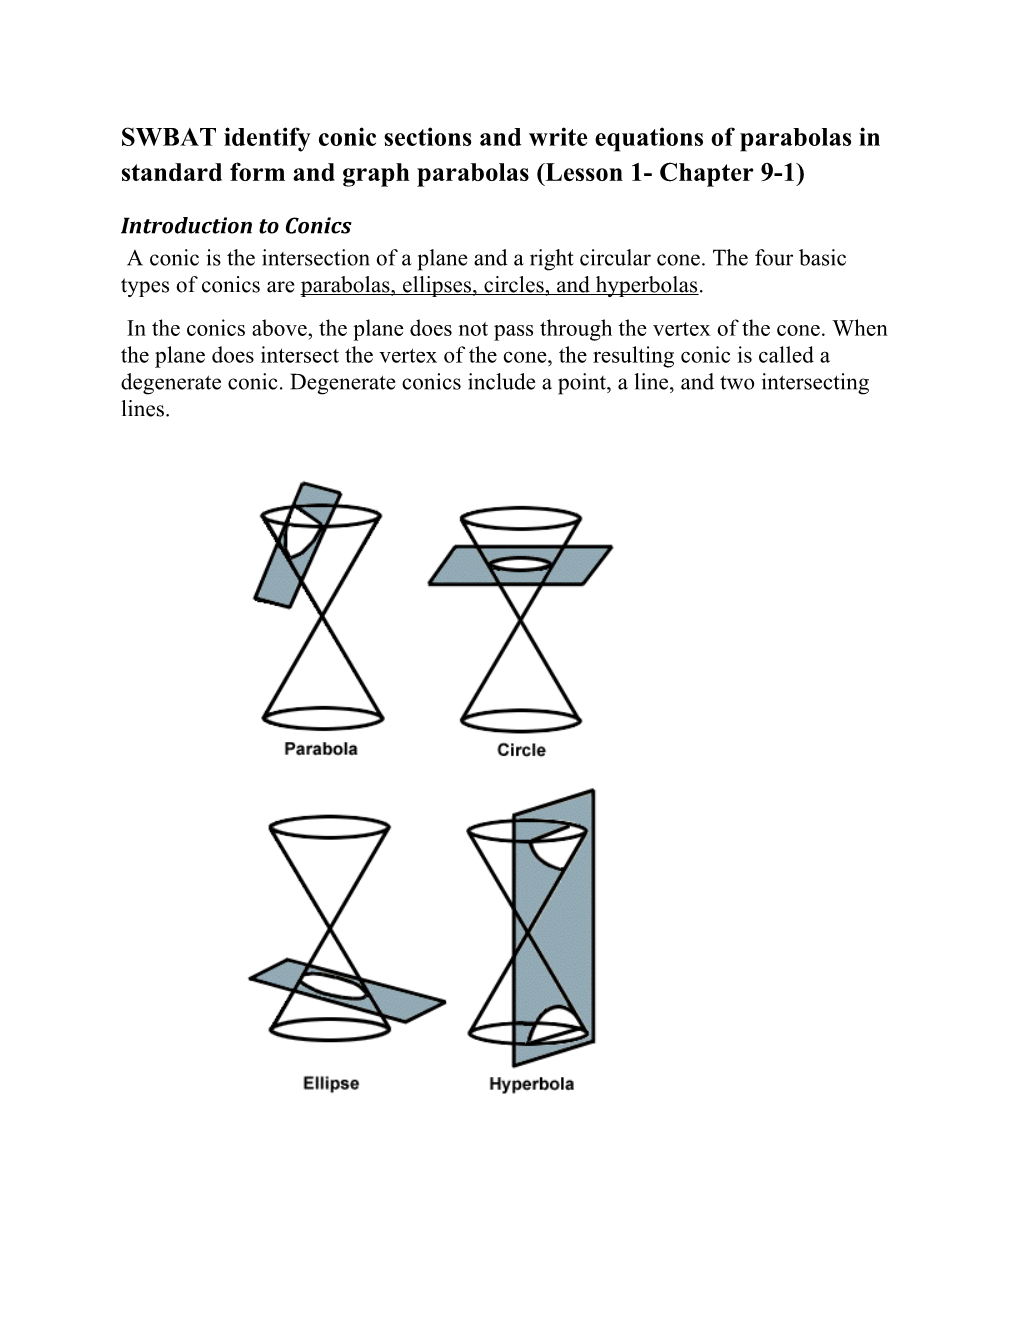 SWBAT Identify Conic Sections and Write Equations of Parabolas in Standard Form and Graph